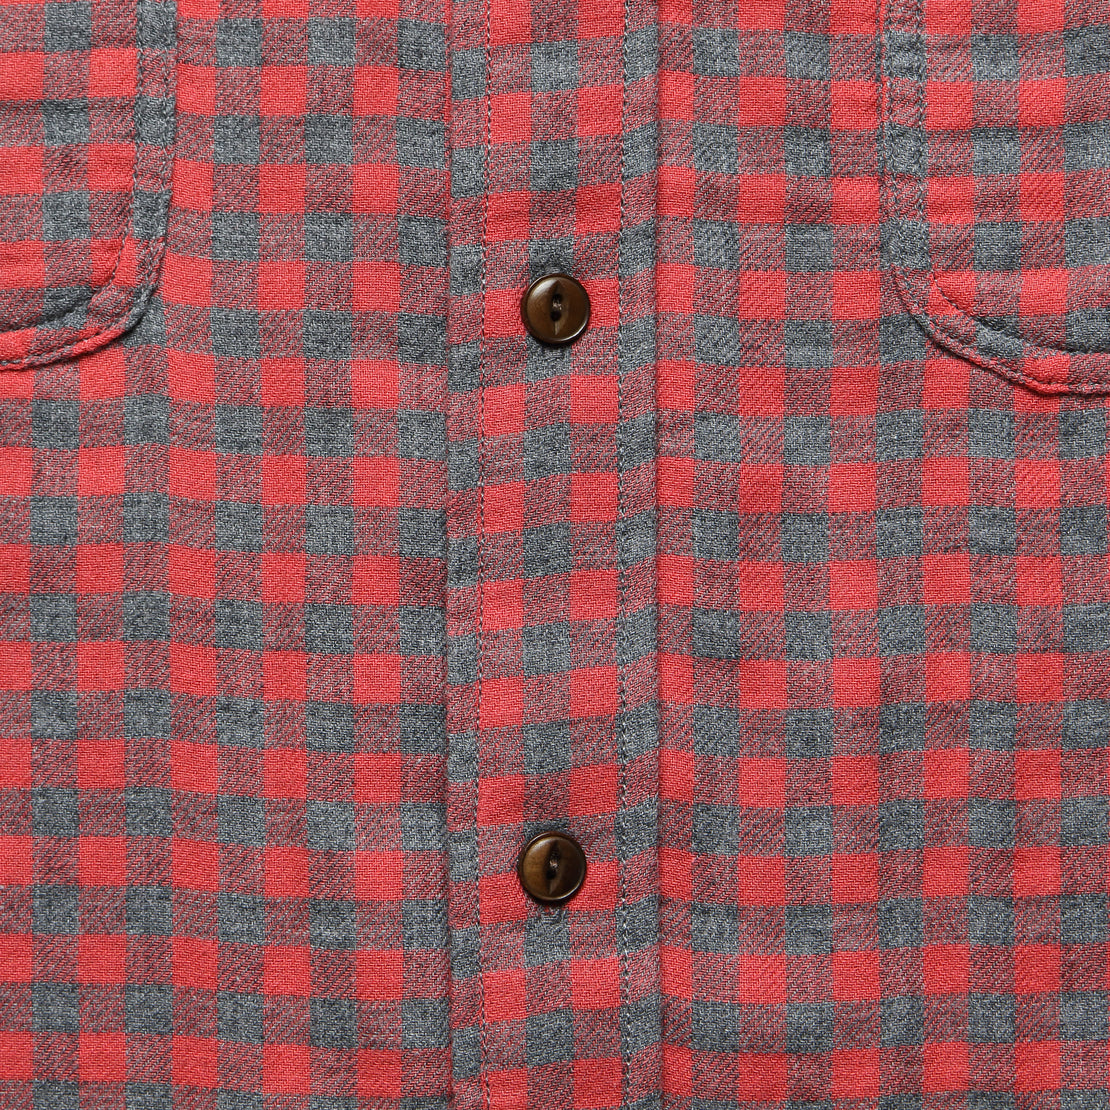 Doublecloth Belmar Shirt - Red Charcoal Buffalo - Faherty - STAG Provisions - Tops - L/S Woven - Plaid